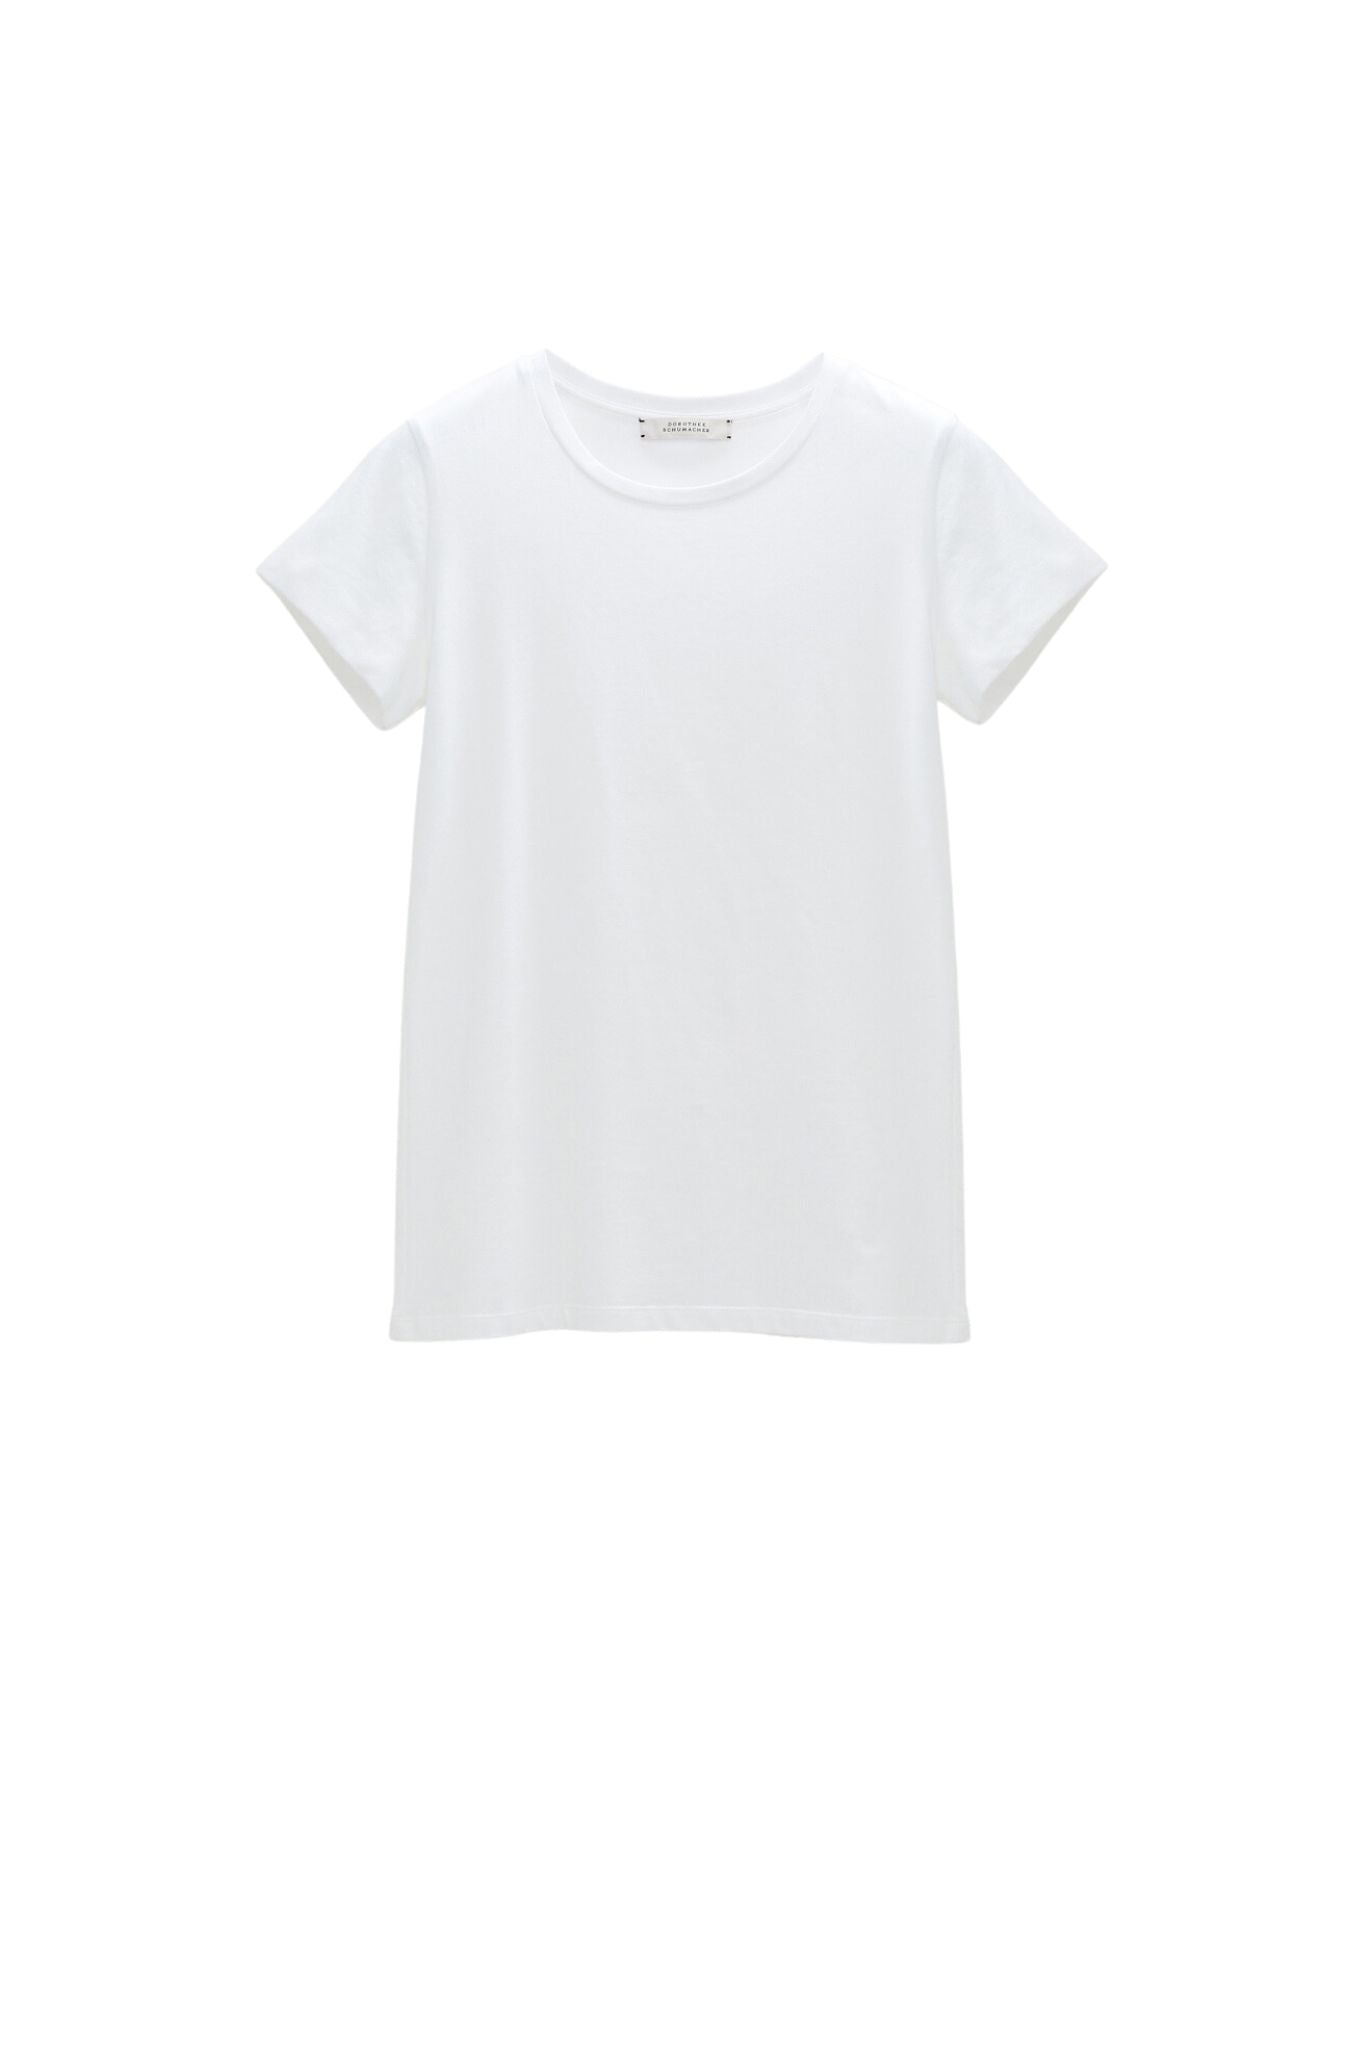 Dorothee Schumacher All Time Favorites O-Neck Tee